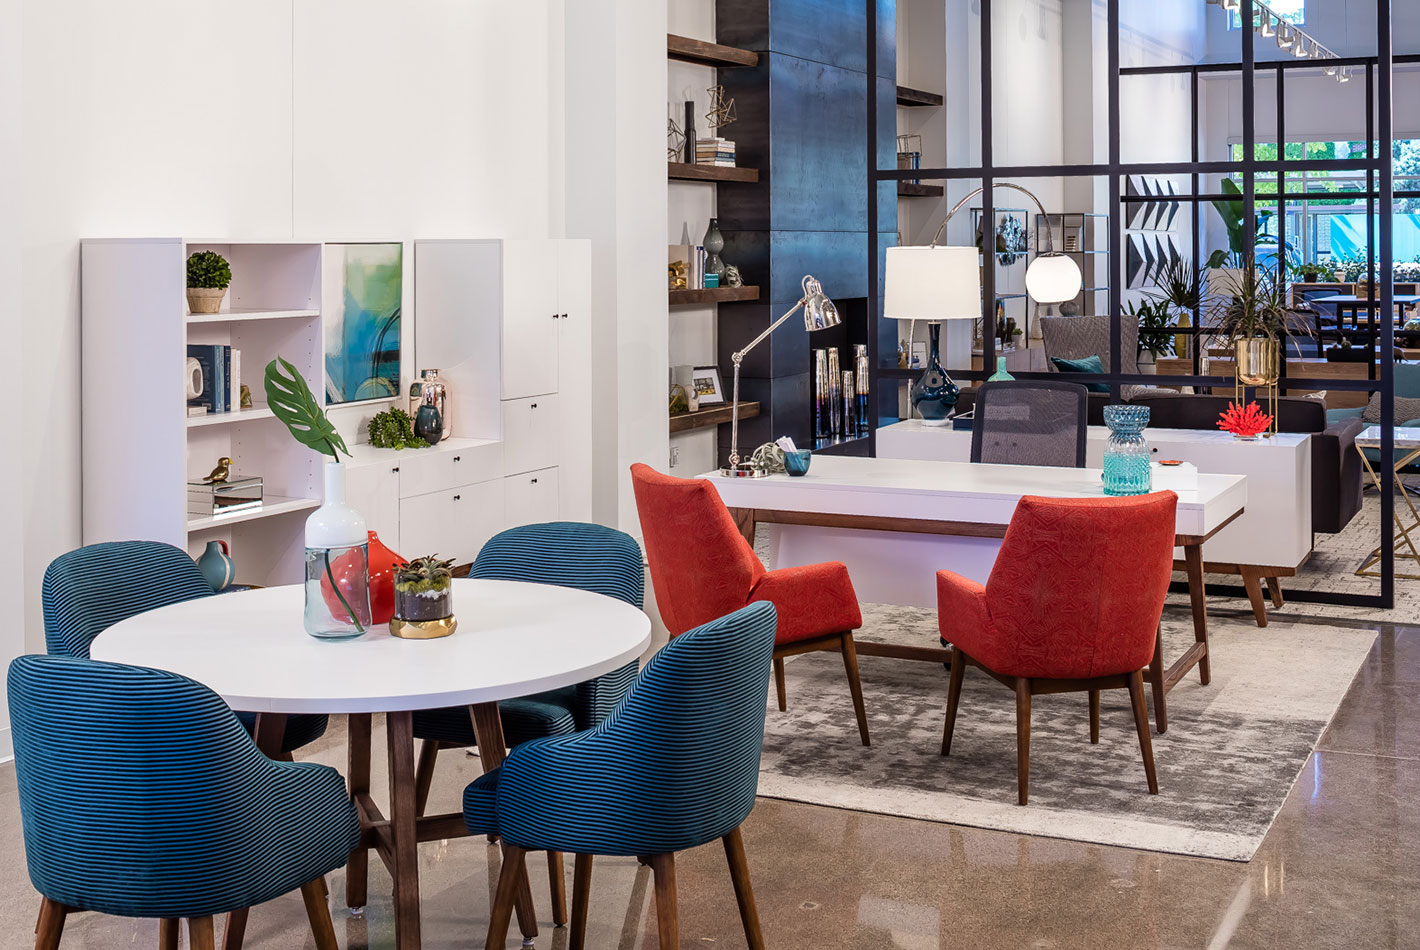 A long view into the Minneapolis Workspace showroom of West Elm furniture. Several different furniture collections, some blue and some red, are feature side by side.